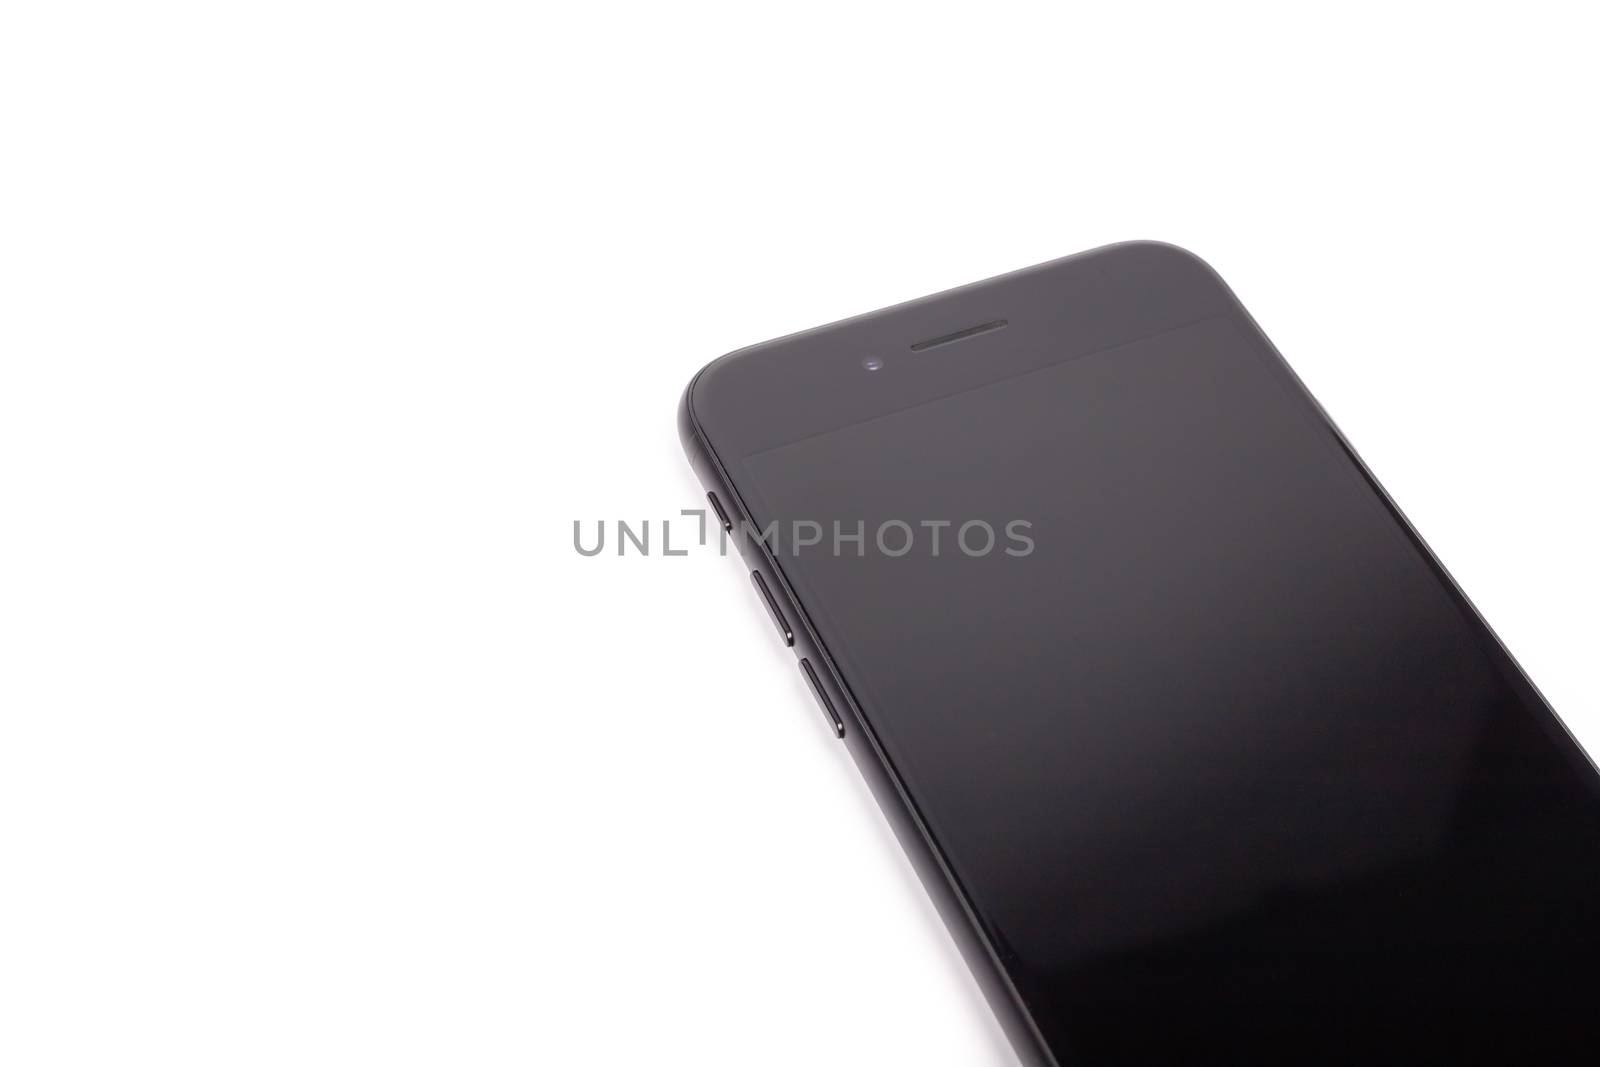 Paris, France - May 14, 2020: Design of the new black iPhone SE 2020 from the multinational company Apple during the days of its studio release on a white background